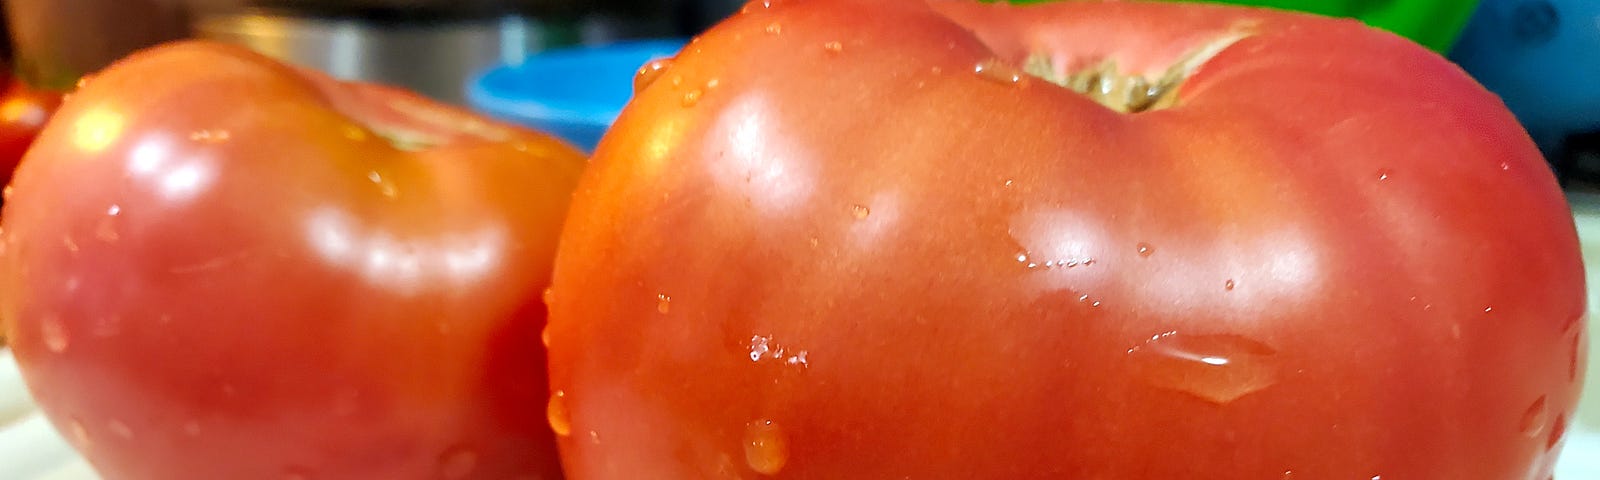 Two rinced Mortgage lifter tomatoes on a white cutting board